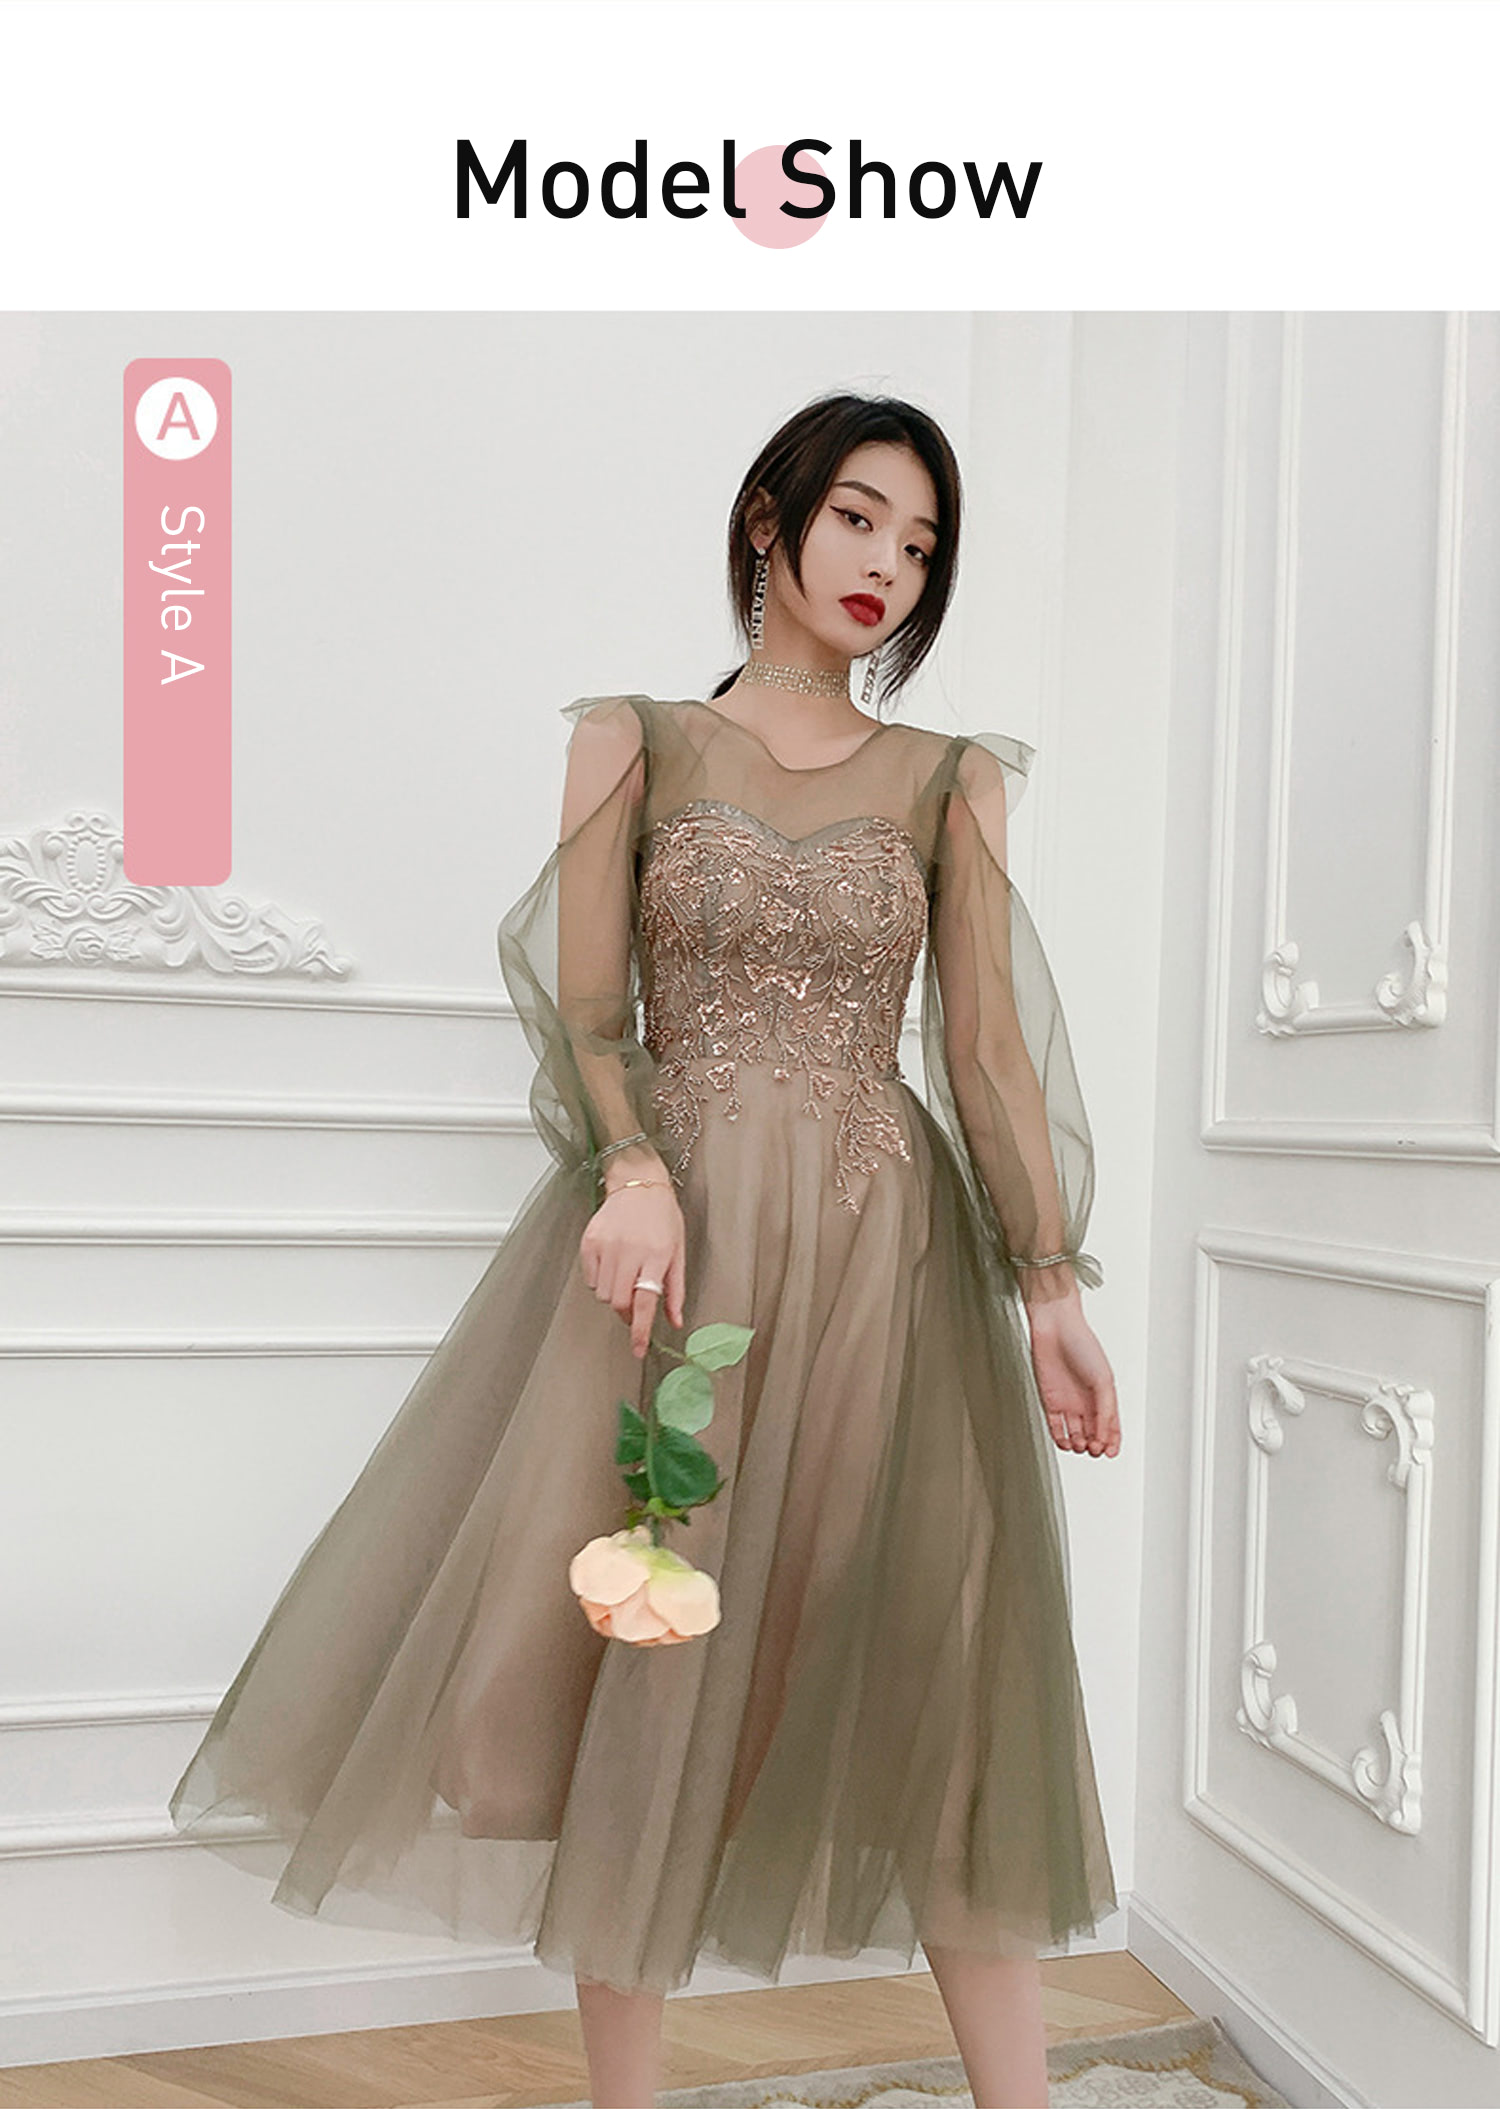 Avocado-Green-Mid-Length-Dress-for-Cocktail-Wedding-Bridesmaid-Party13